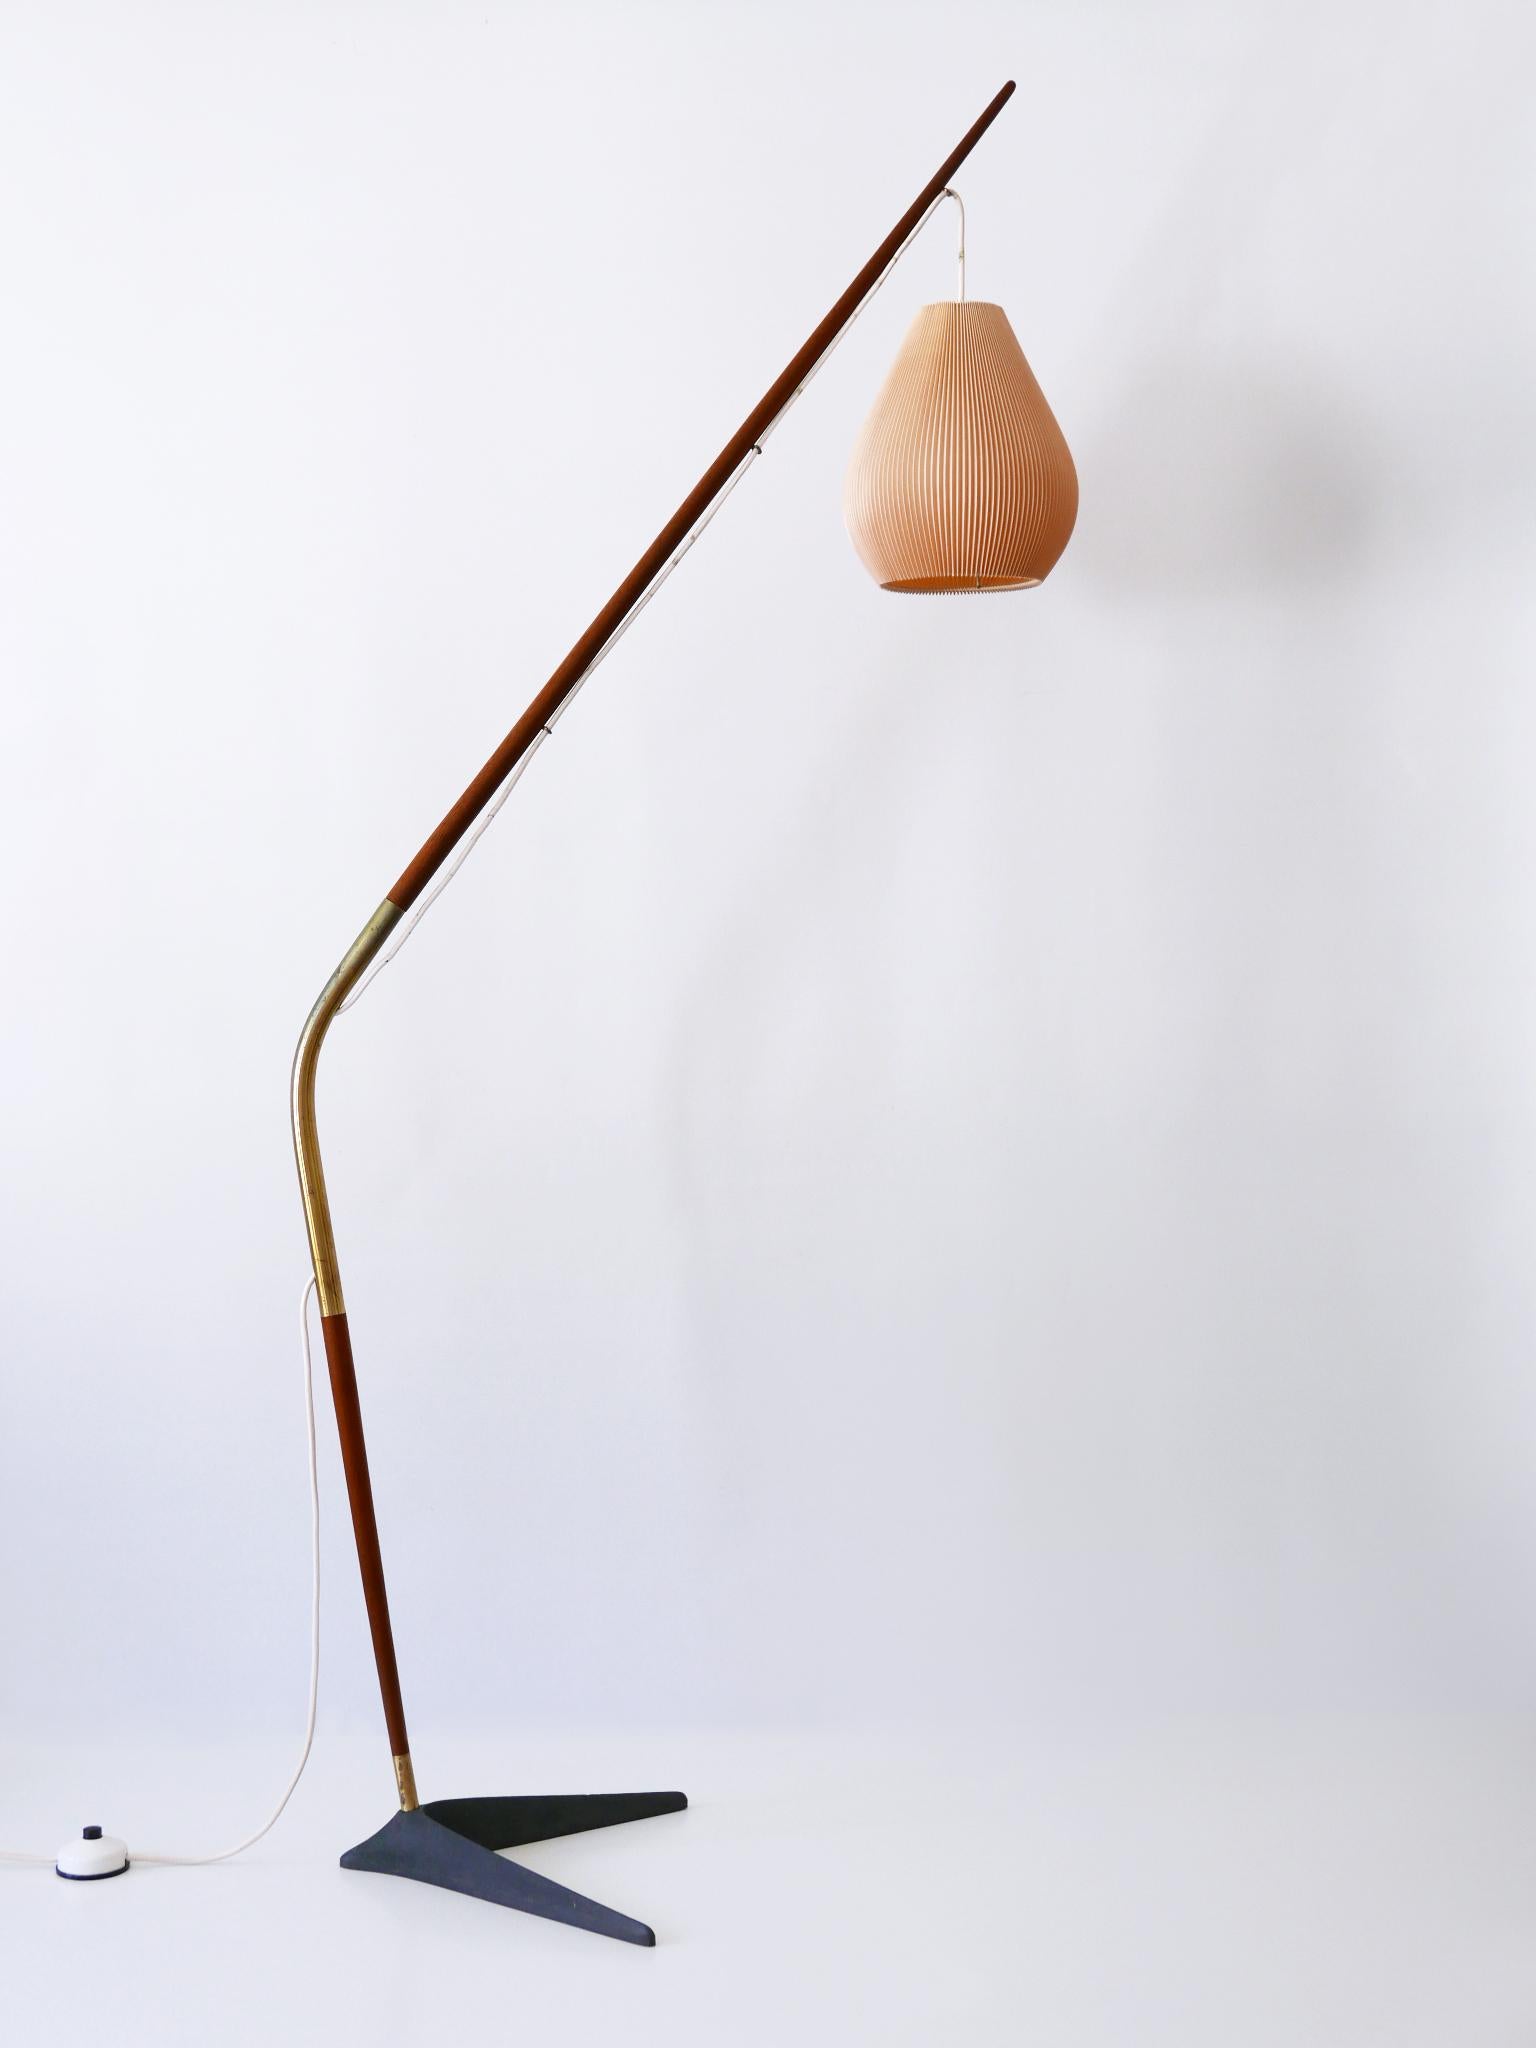 Absolutely rare, elegant and highly decorative Mid-Century Modern floor lamp or reading light 'Fishing Pole'. The drop height of the lamp shade is adjustable. Designed by Svend Aage Holm Sørensen for Holm Sørensen, Denmark, 1950s.

Executed in teak,